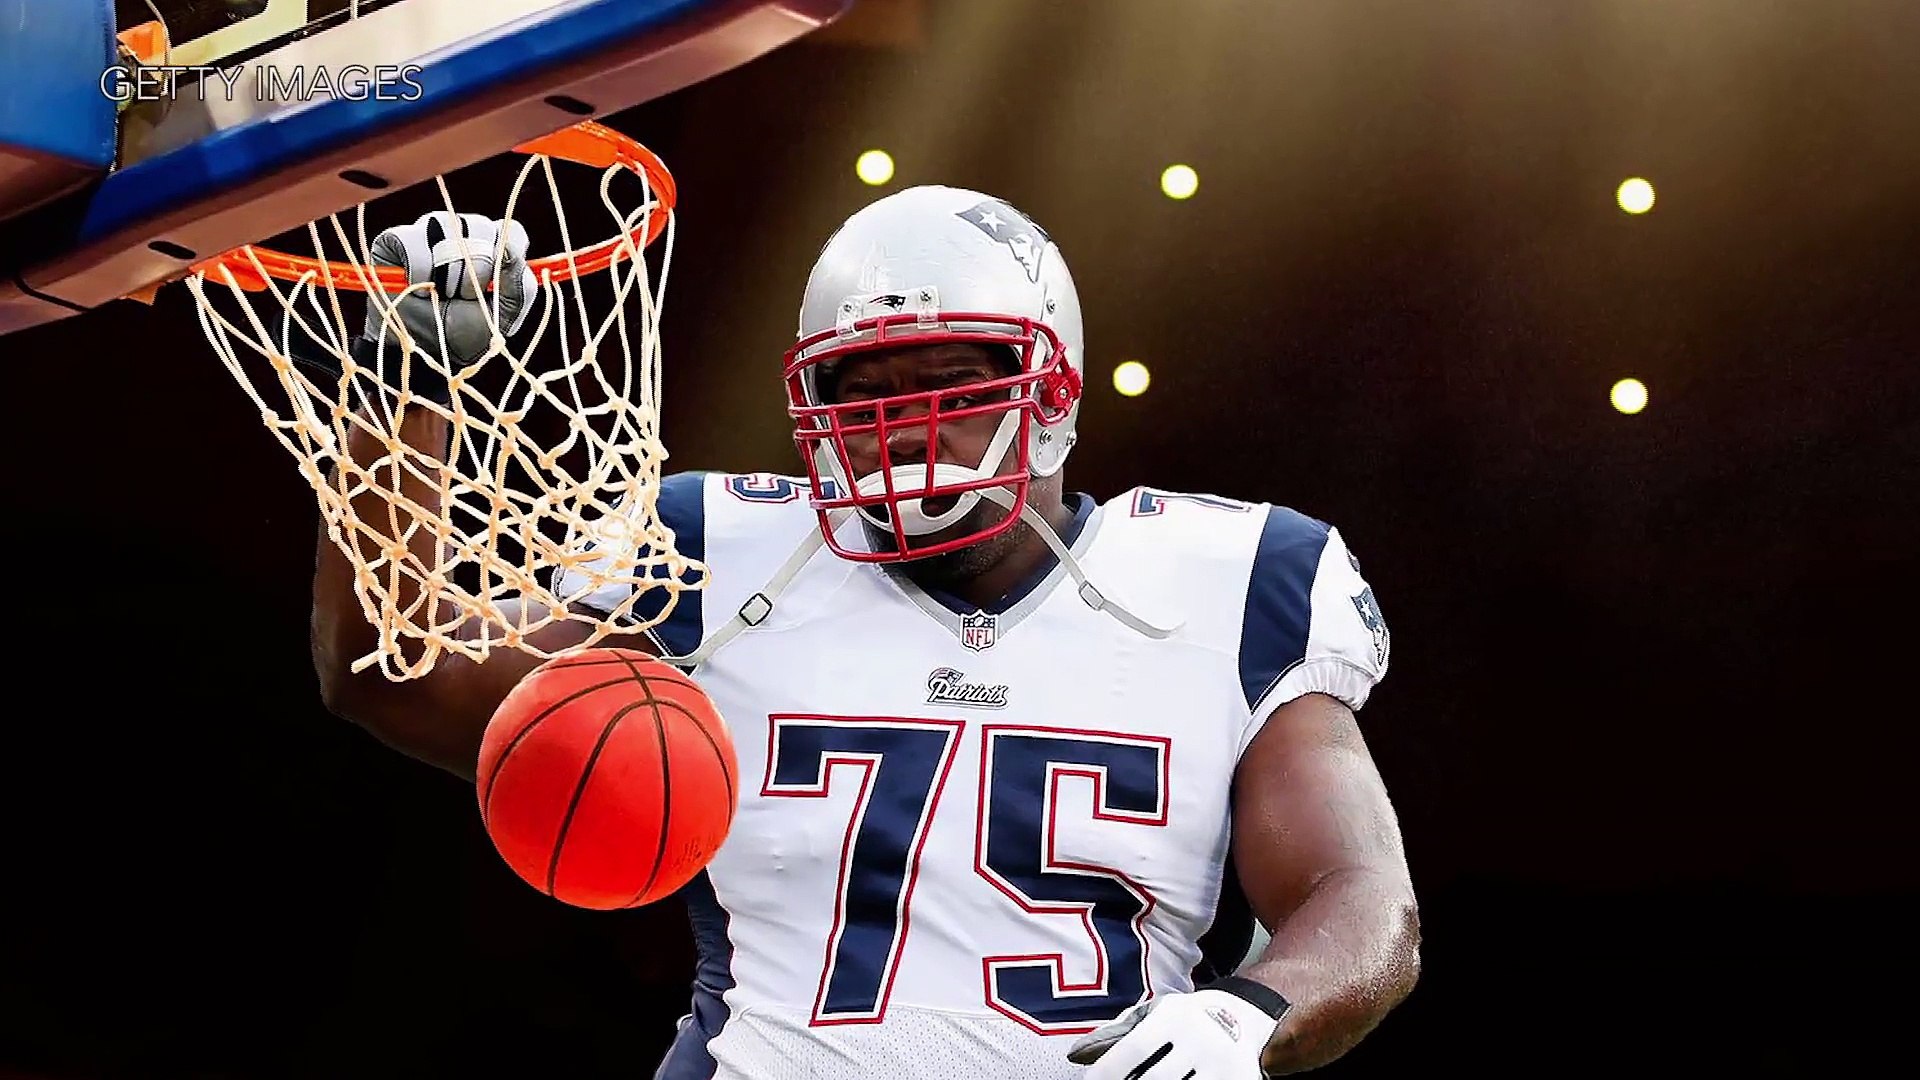 Texans defensive star Vince Wilfork meme'd within minutes of 'Hard